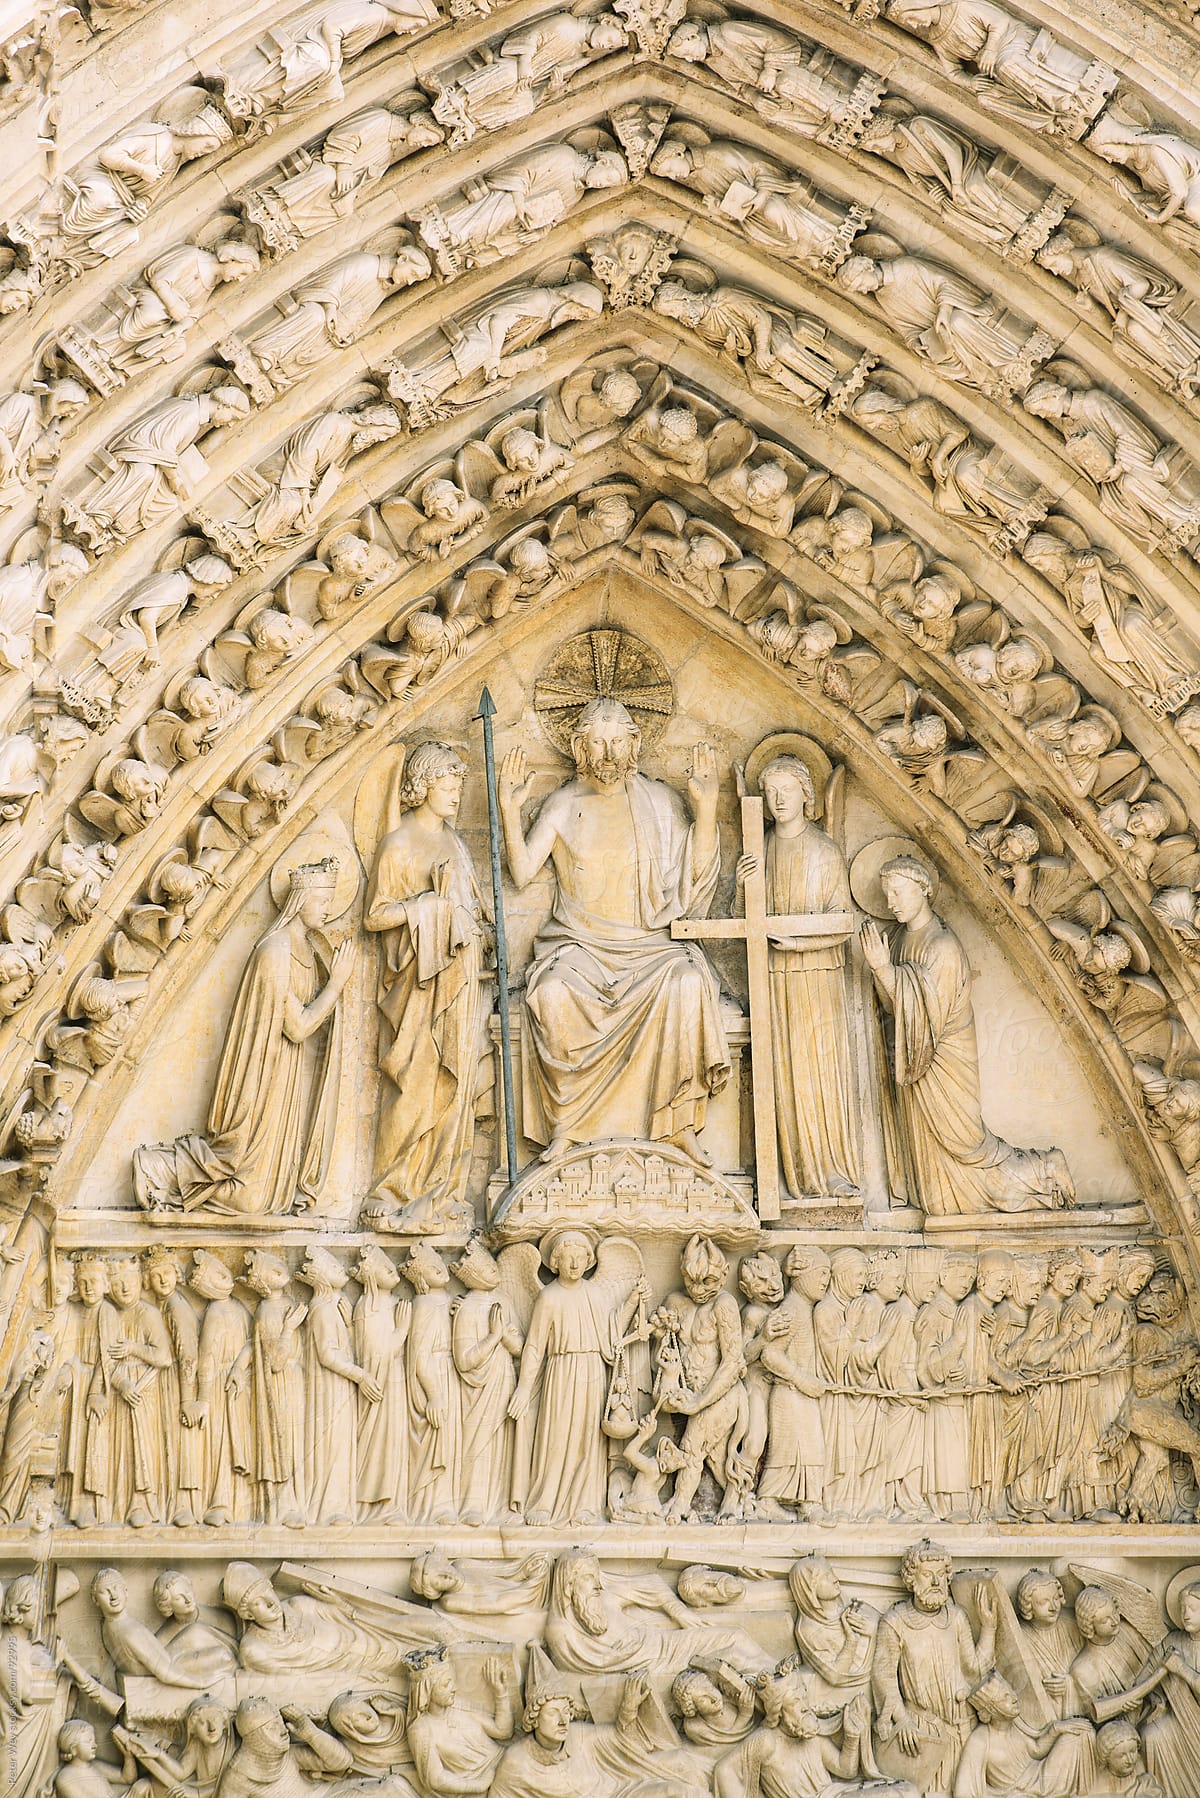 Closeup view of sculptures at the Notre Dame church in Paris